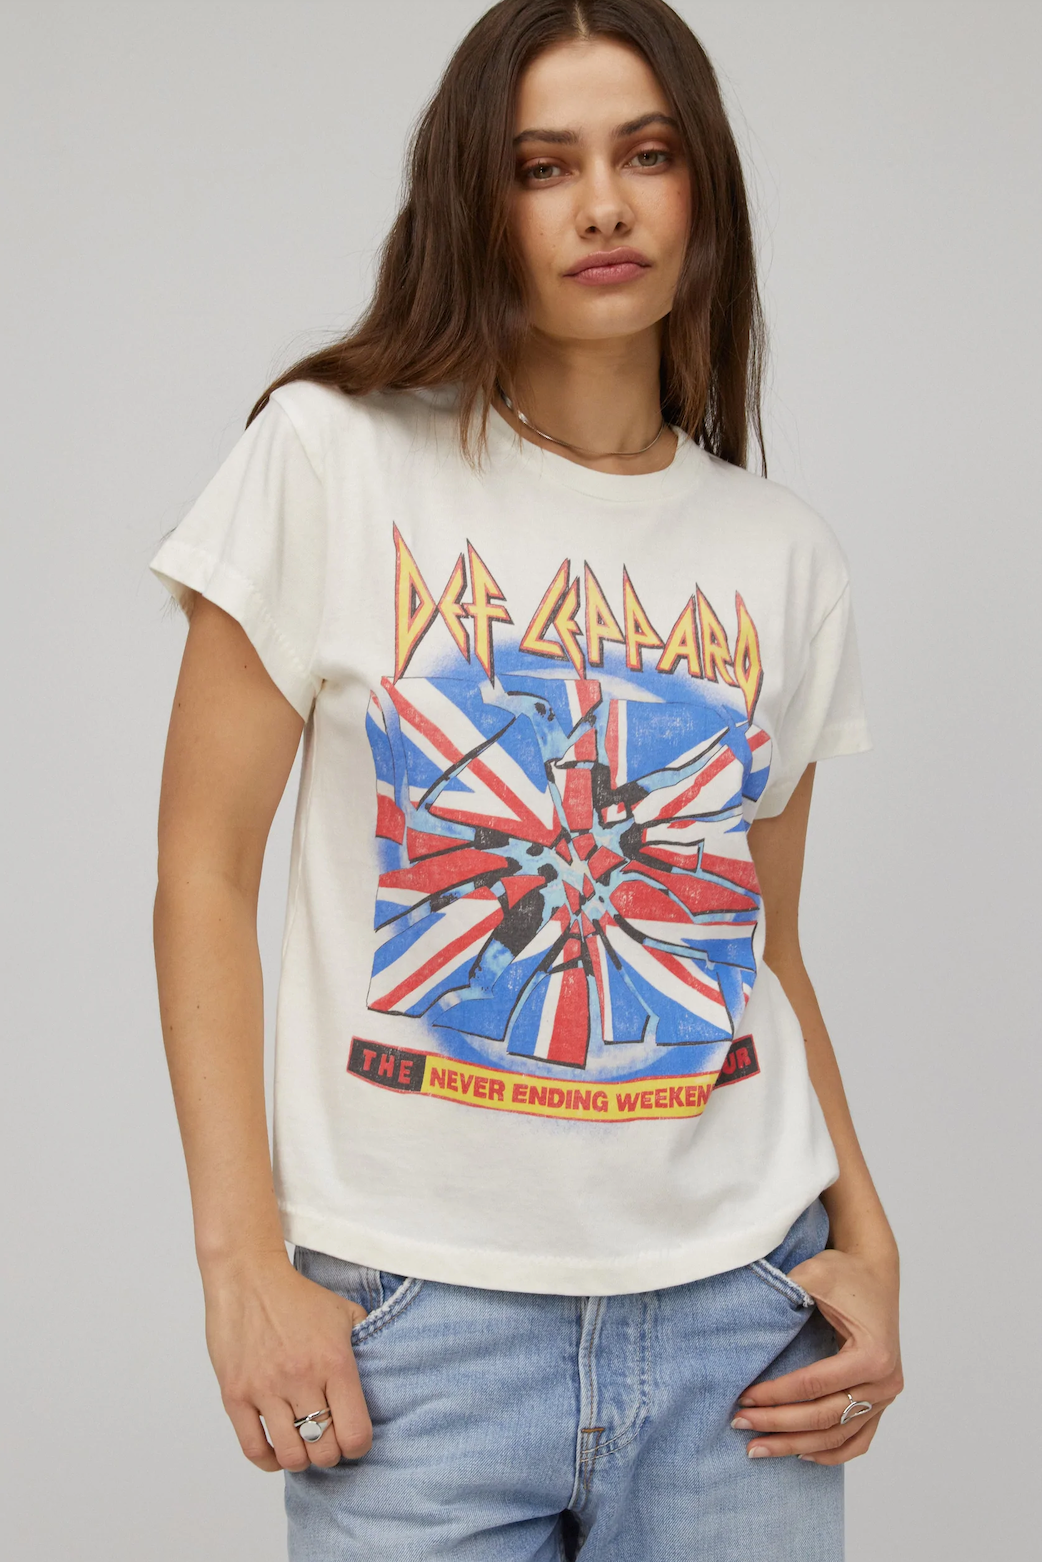 DAYDREAMER DEF LEPPARD 1993 TOUR TEE IN WHITE